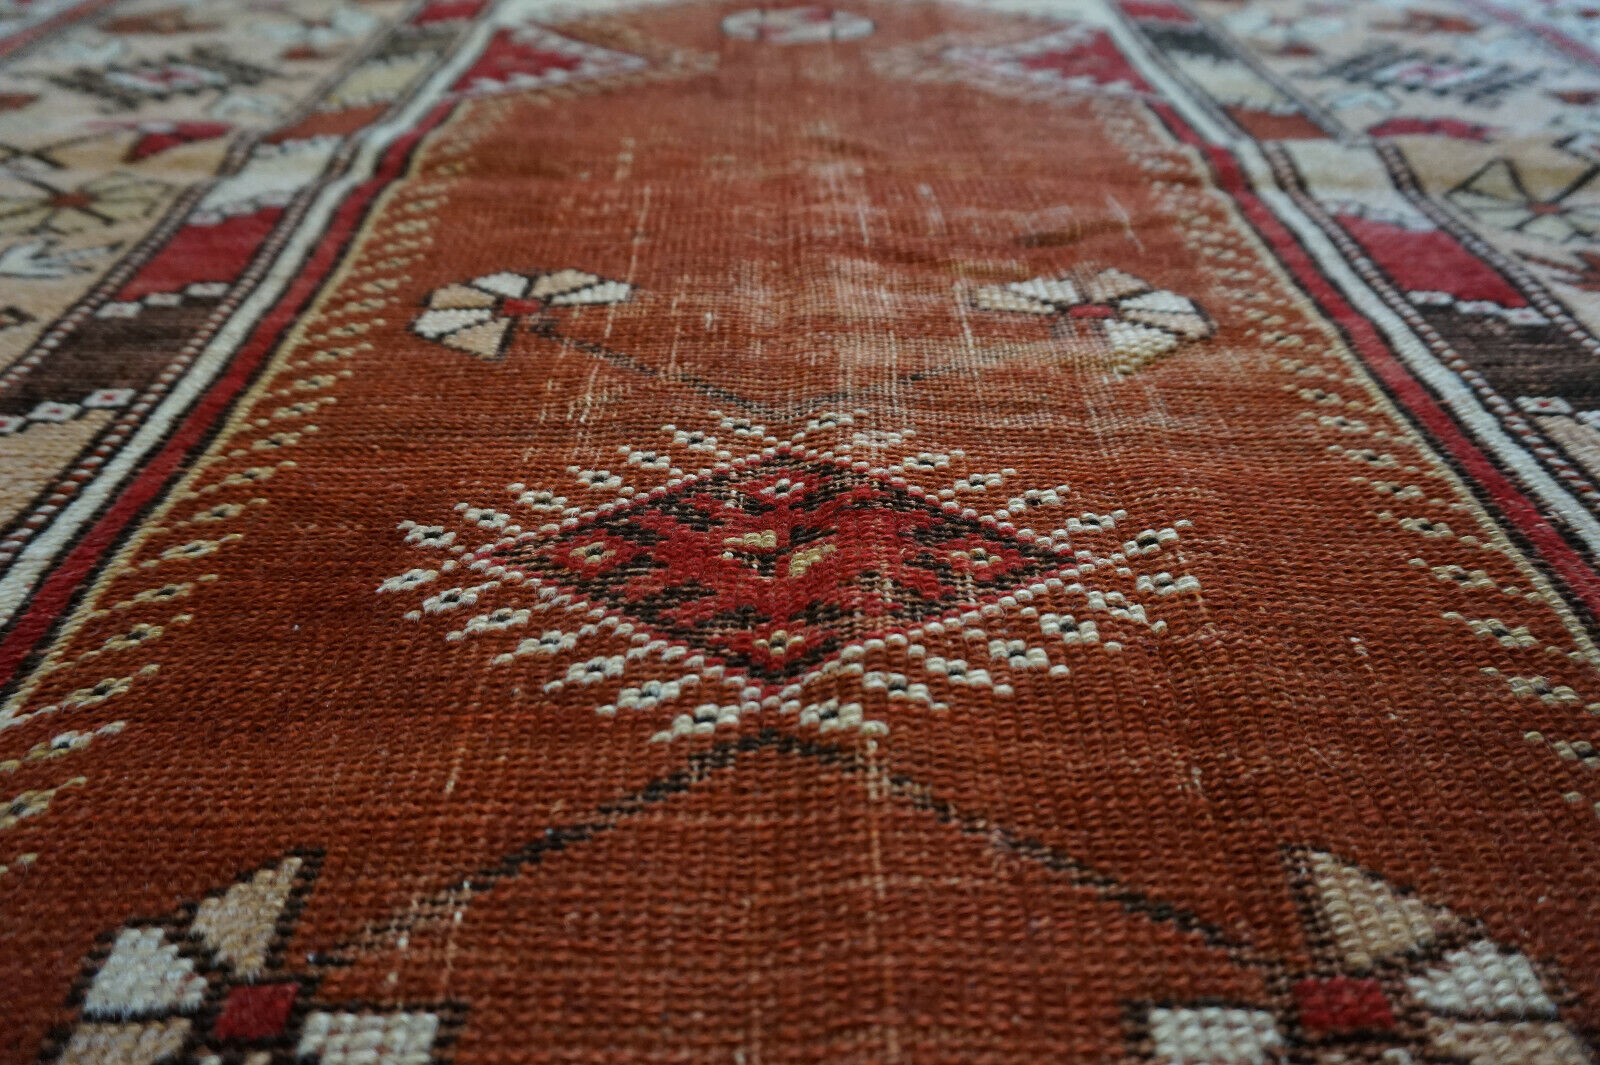 Overhead shot of the Handmade Traditional Turkish Melas Rug displaying size and dimensions